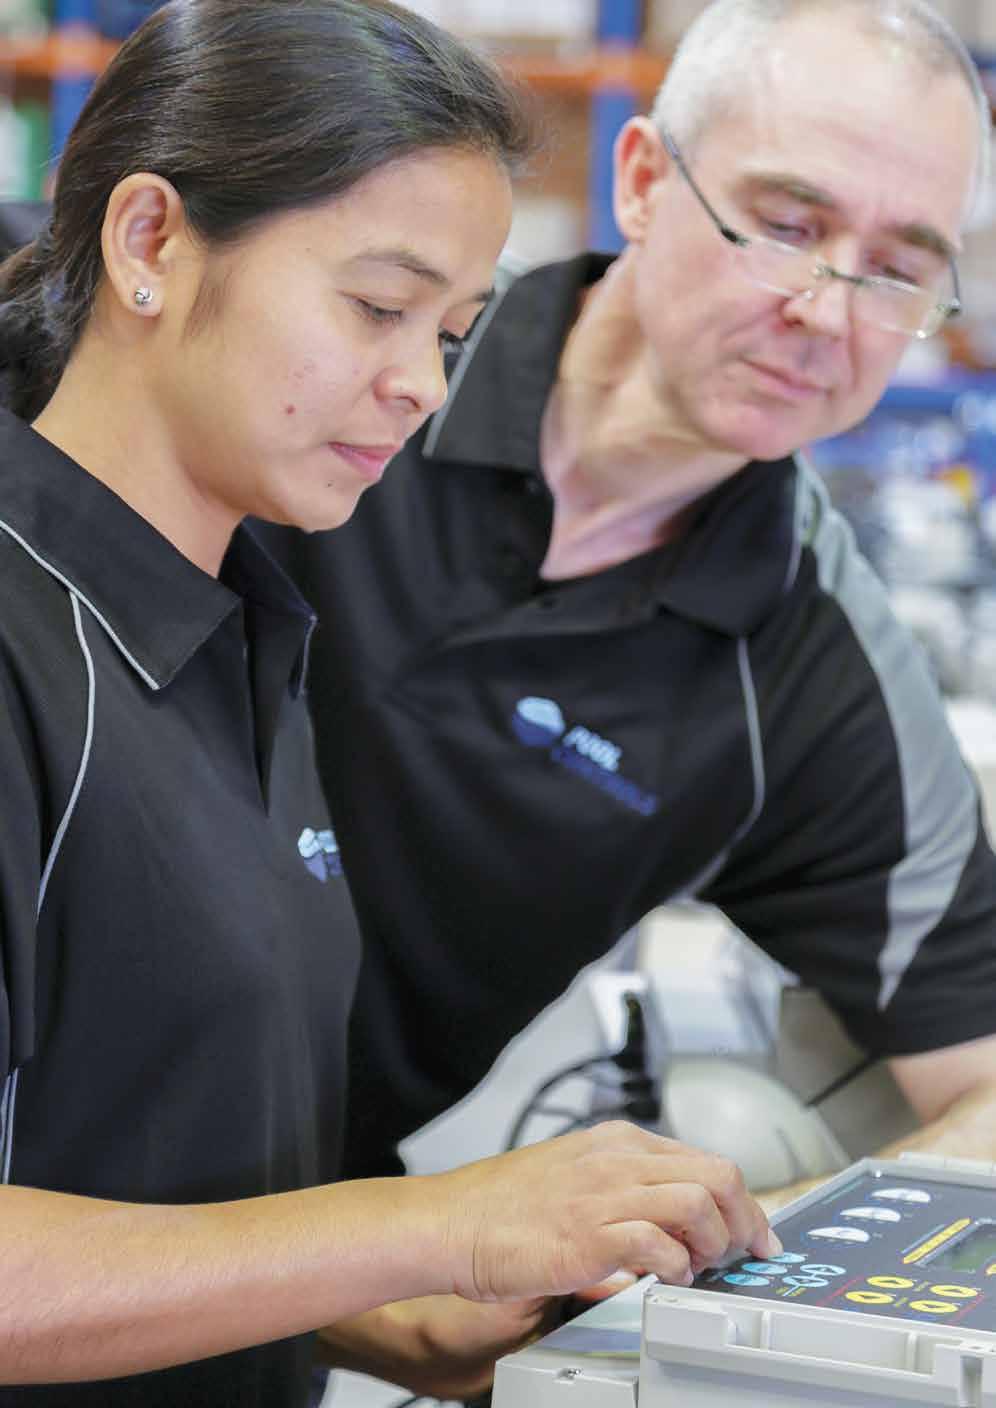 Training Opportunities with Pool Controls After 38 years experience, Pool Controls is able to offer expert, balanced advice on many areas of pool chemistry and automation.